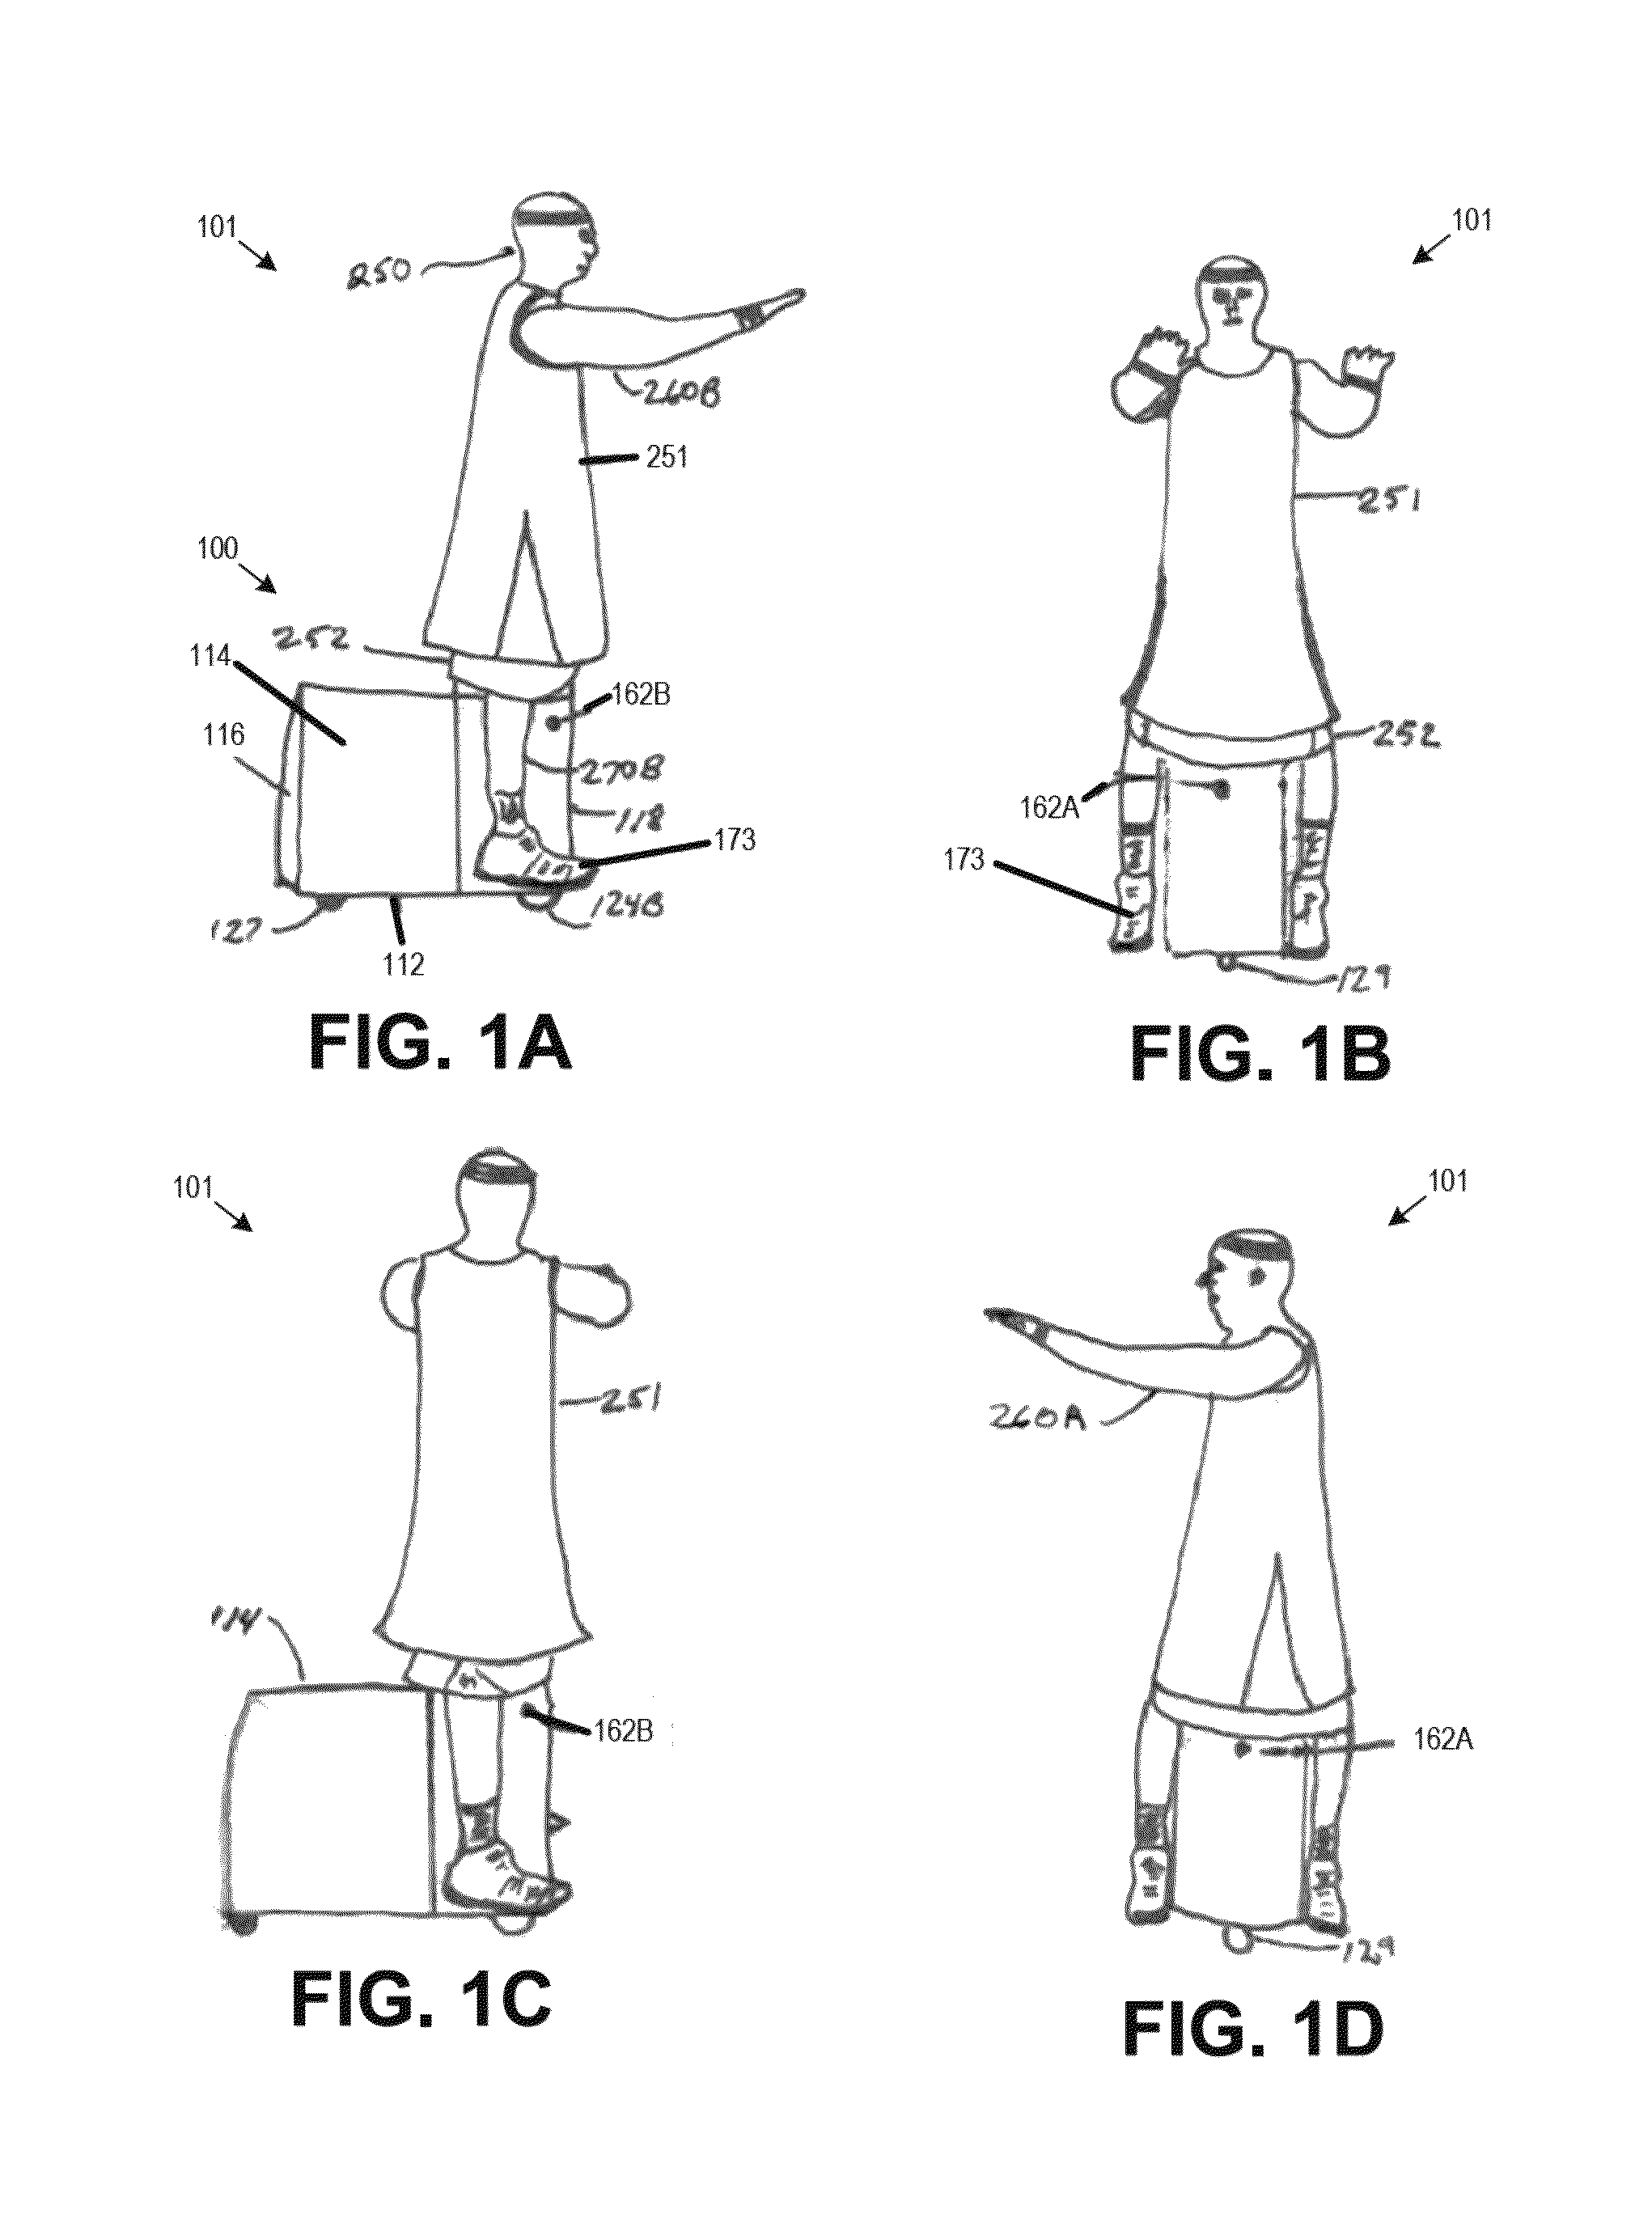 Method and system for creating and controlling a vehicular robot athlete